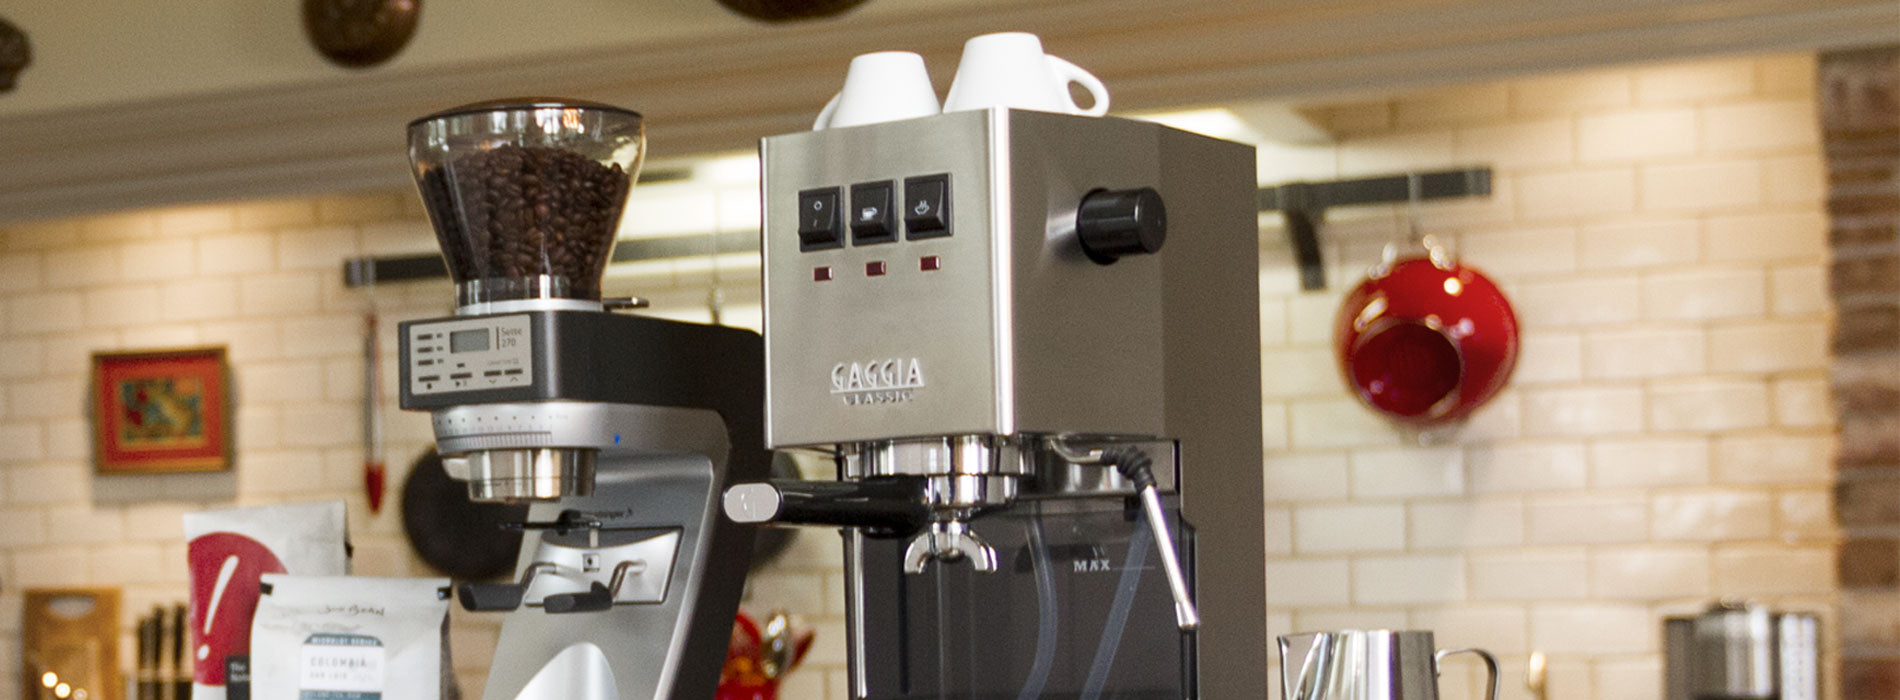 The 7 Best Battery Operated Coffee Makers (2022)